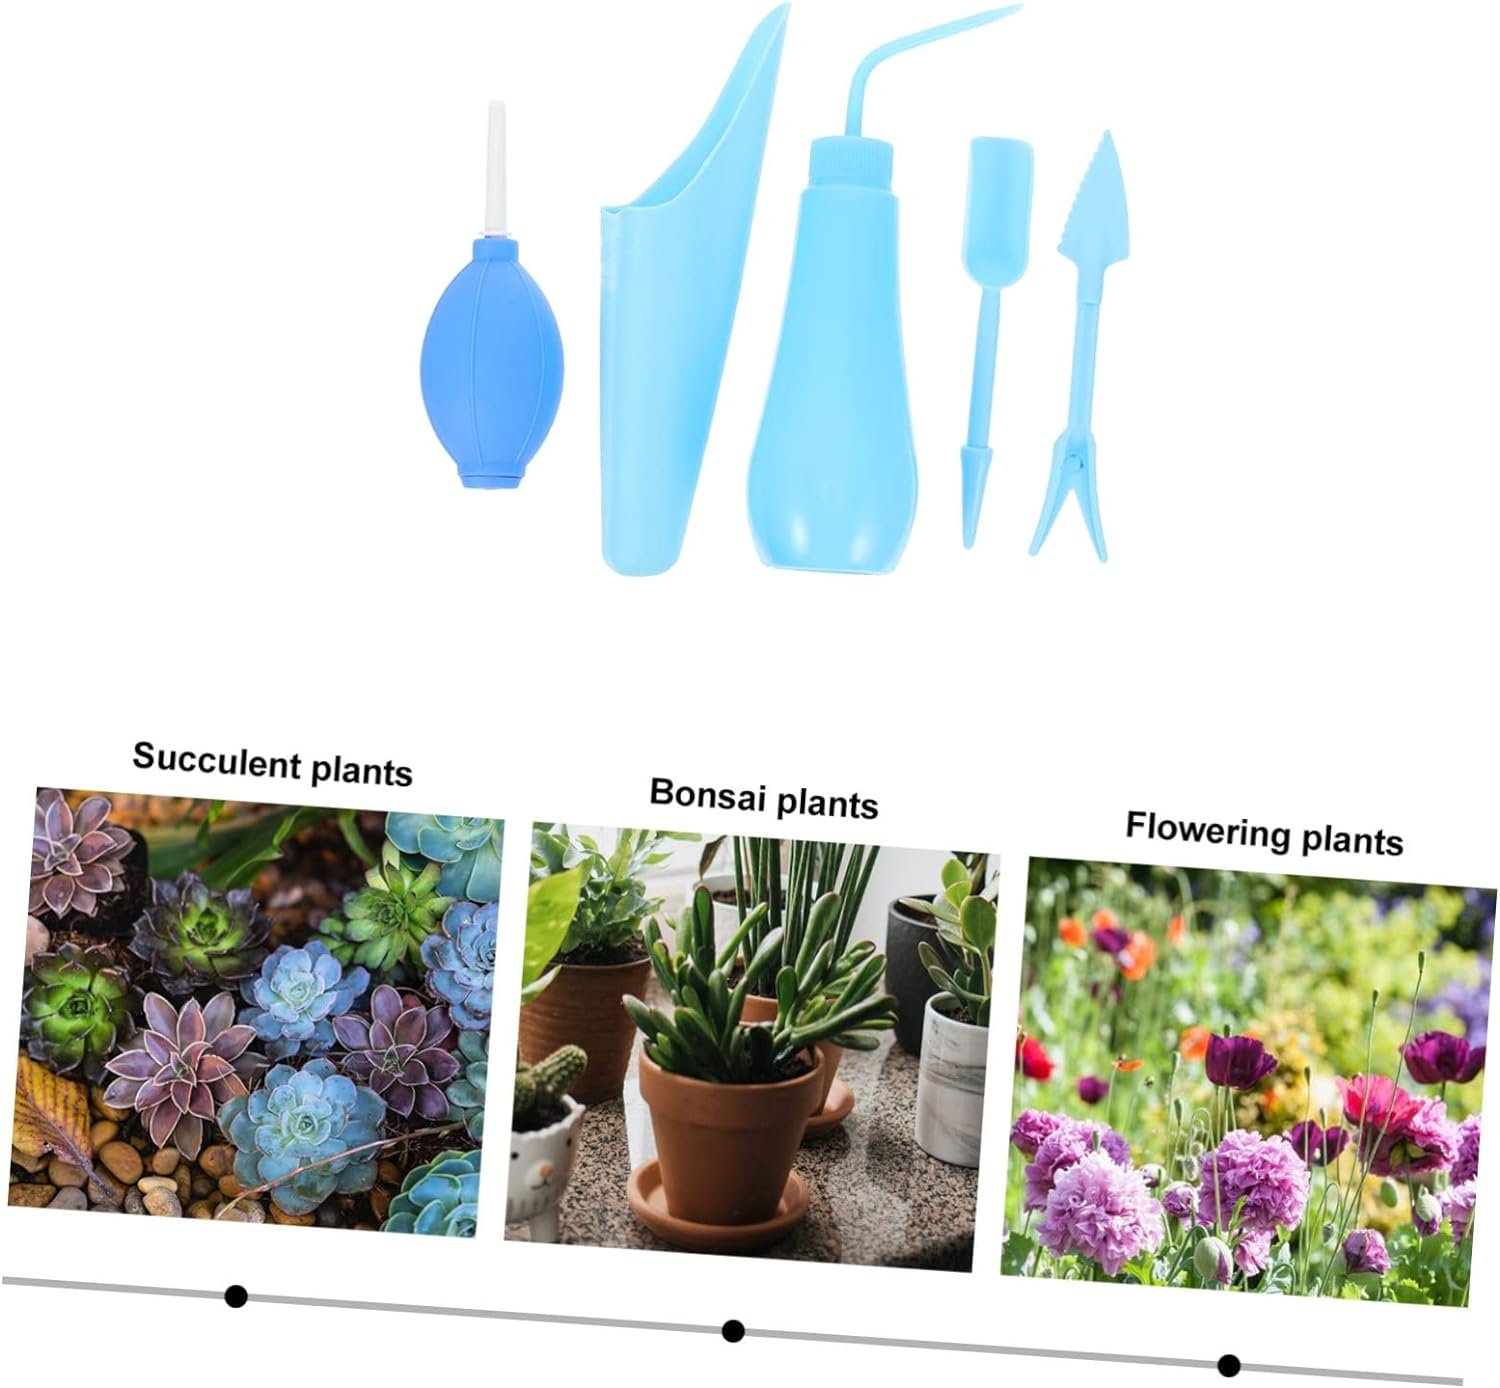 Happyyami 4 Sets Suits for Multi-Functional of Gardening Transplanting Sky Household Succulent Small Hand Garden Sky- Blue Supplies Watering Pot Kit Accessories Starter Tools Indoor